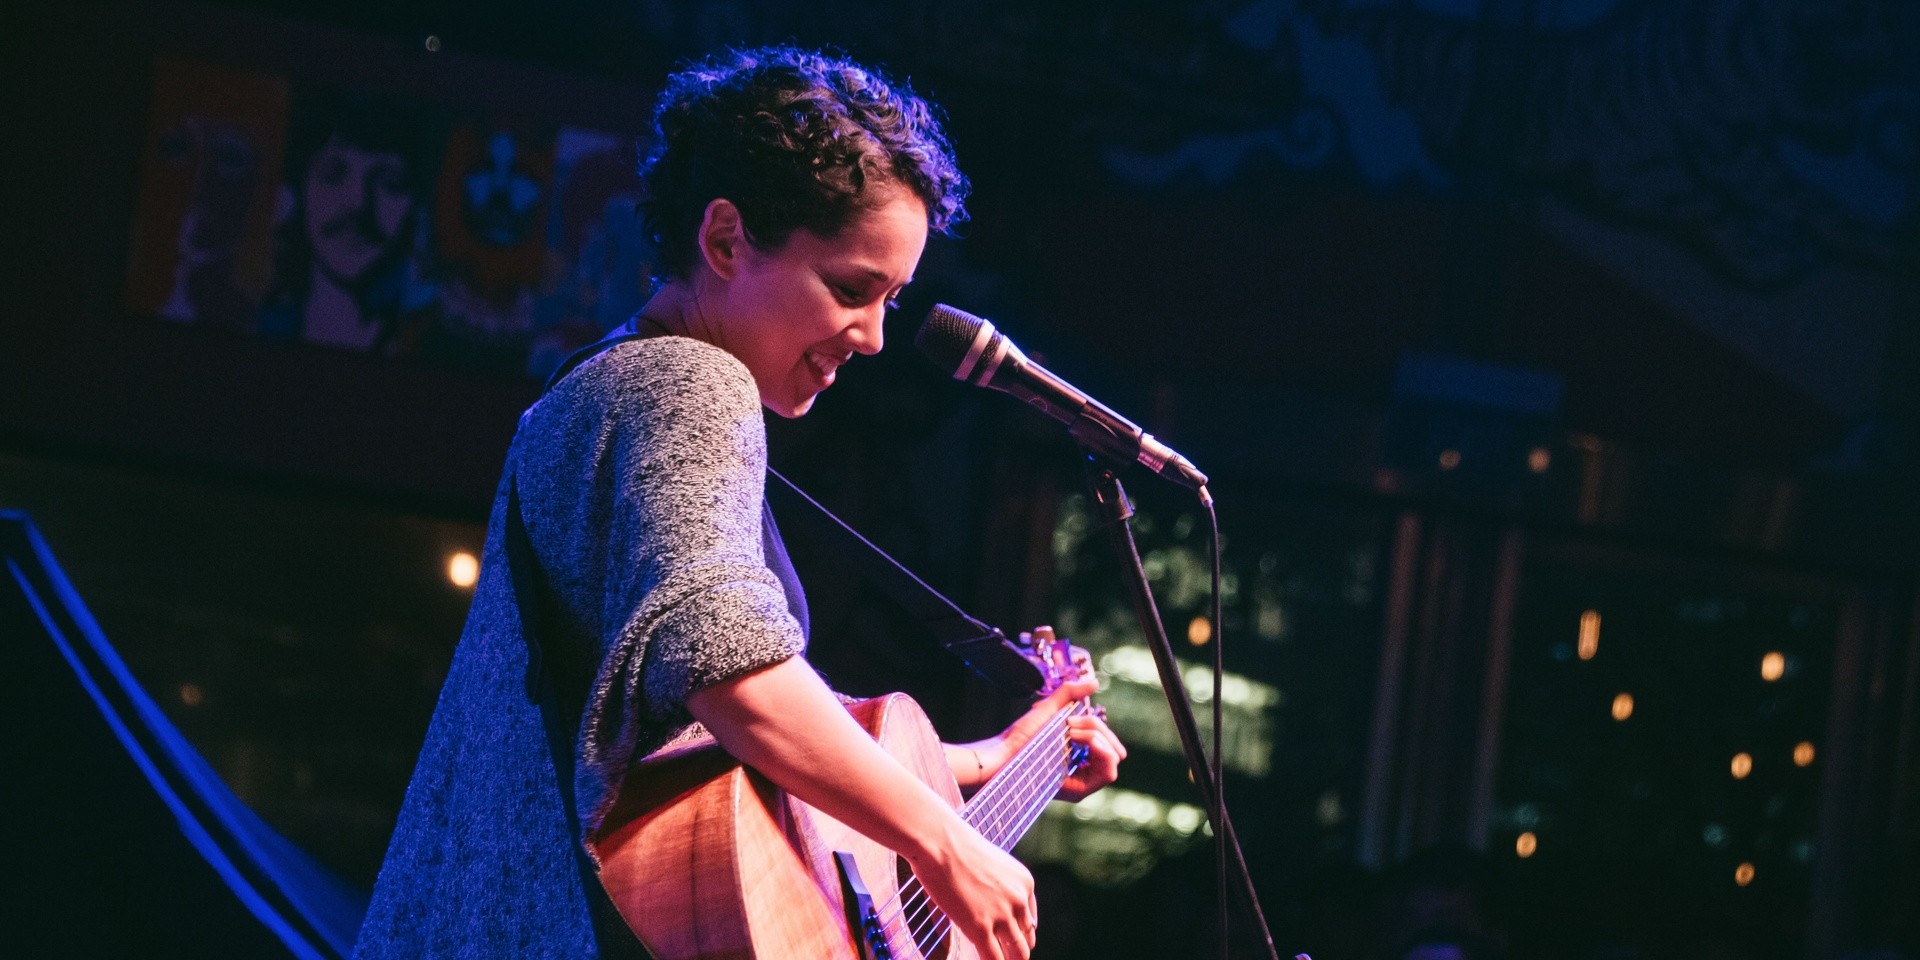 Warmth and good vibes all around with Kina Grannis — photo gallery